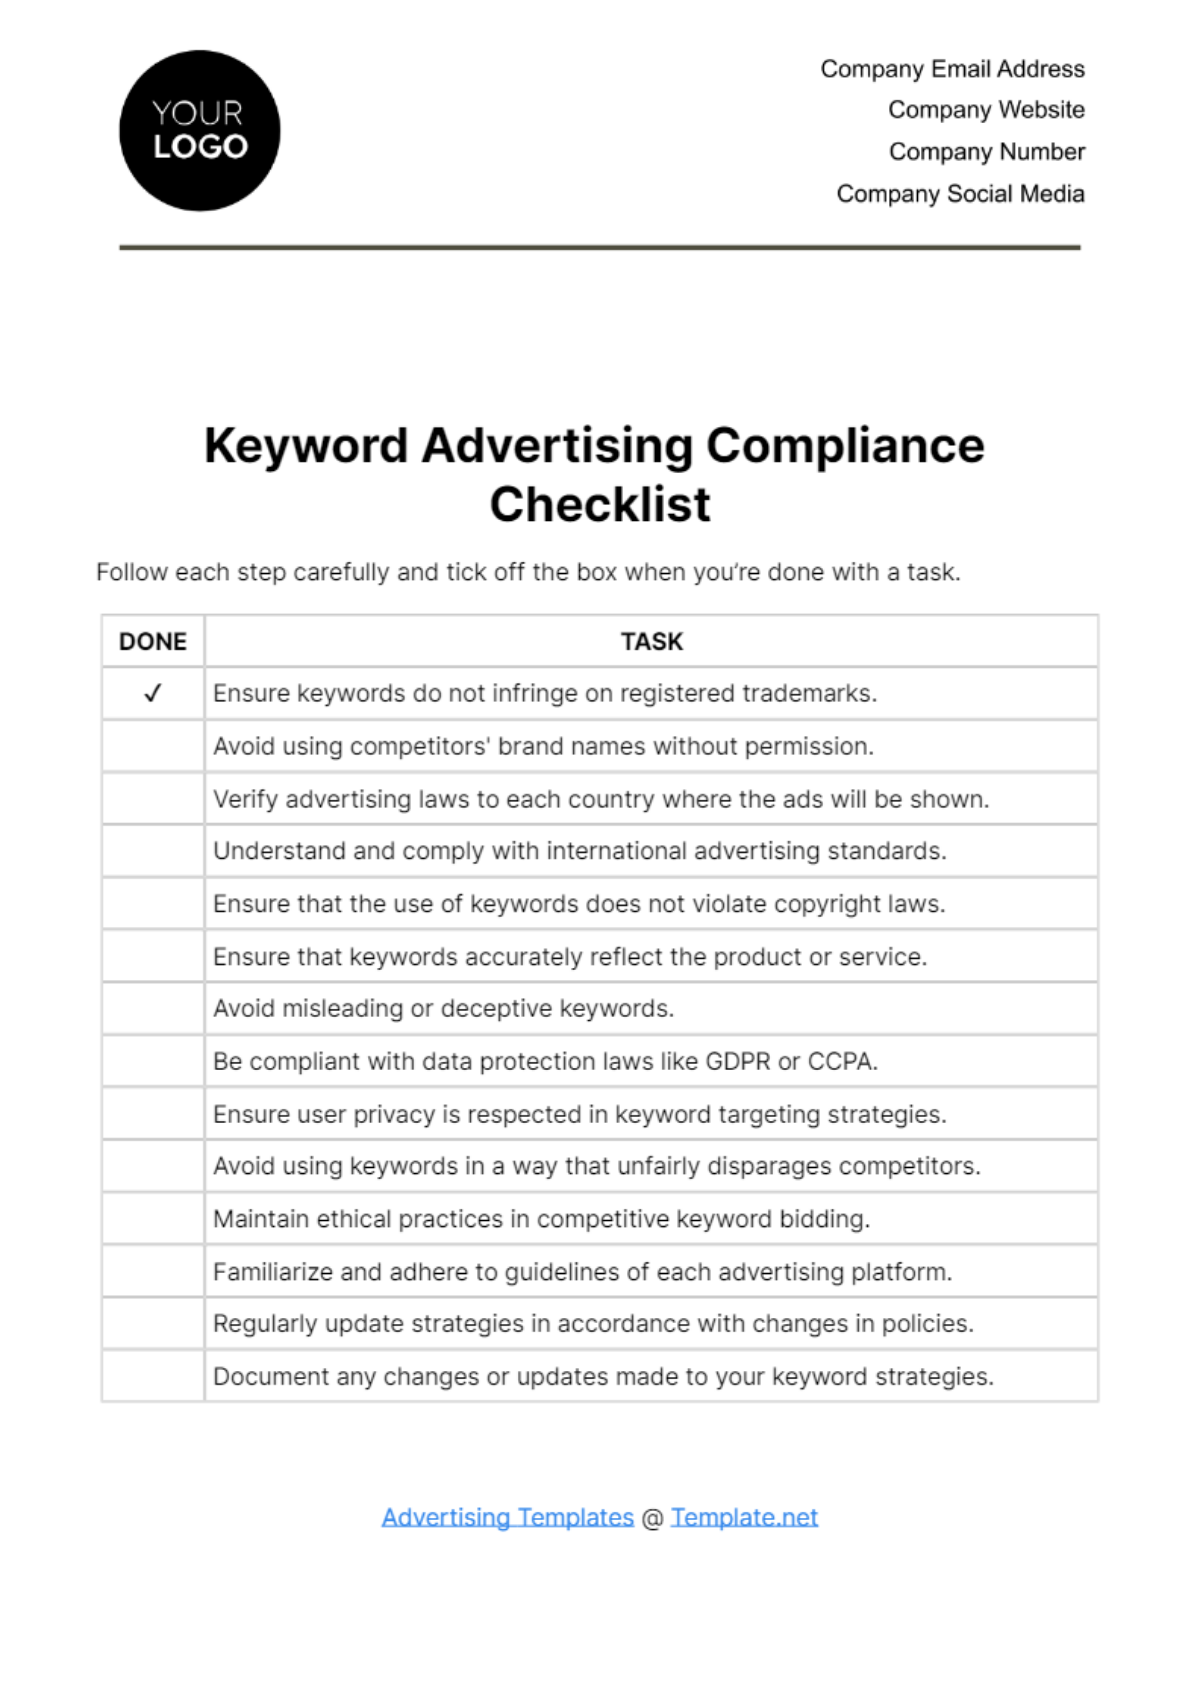 Free Keyword Advertising Compliance Checklist Template